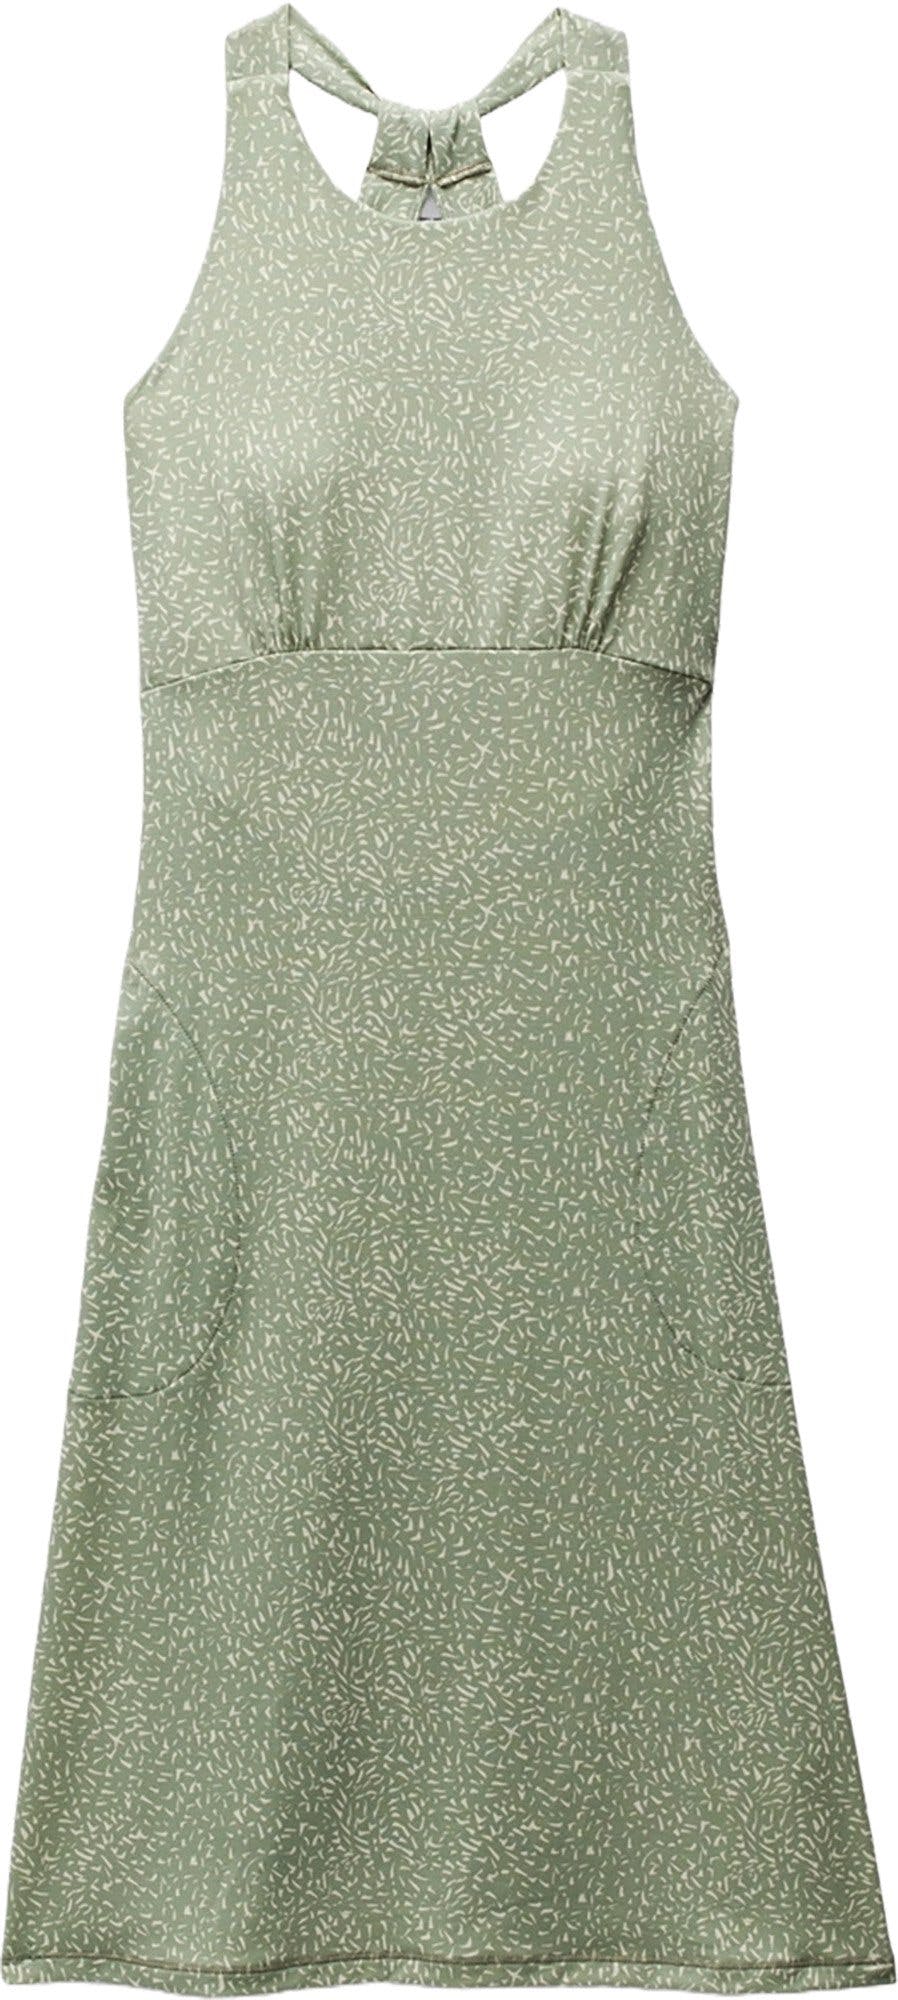 Product image for Jewel Lake Summer Dress - Women's